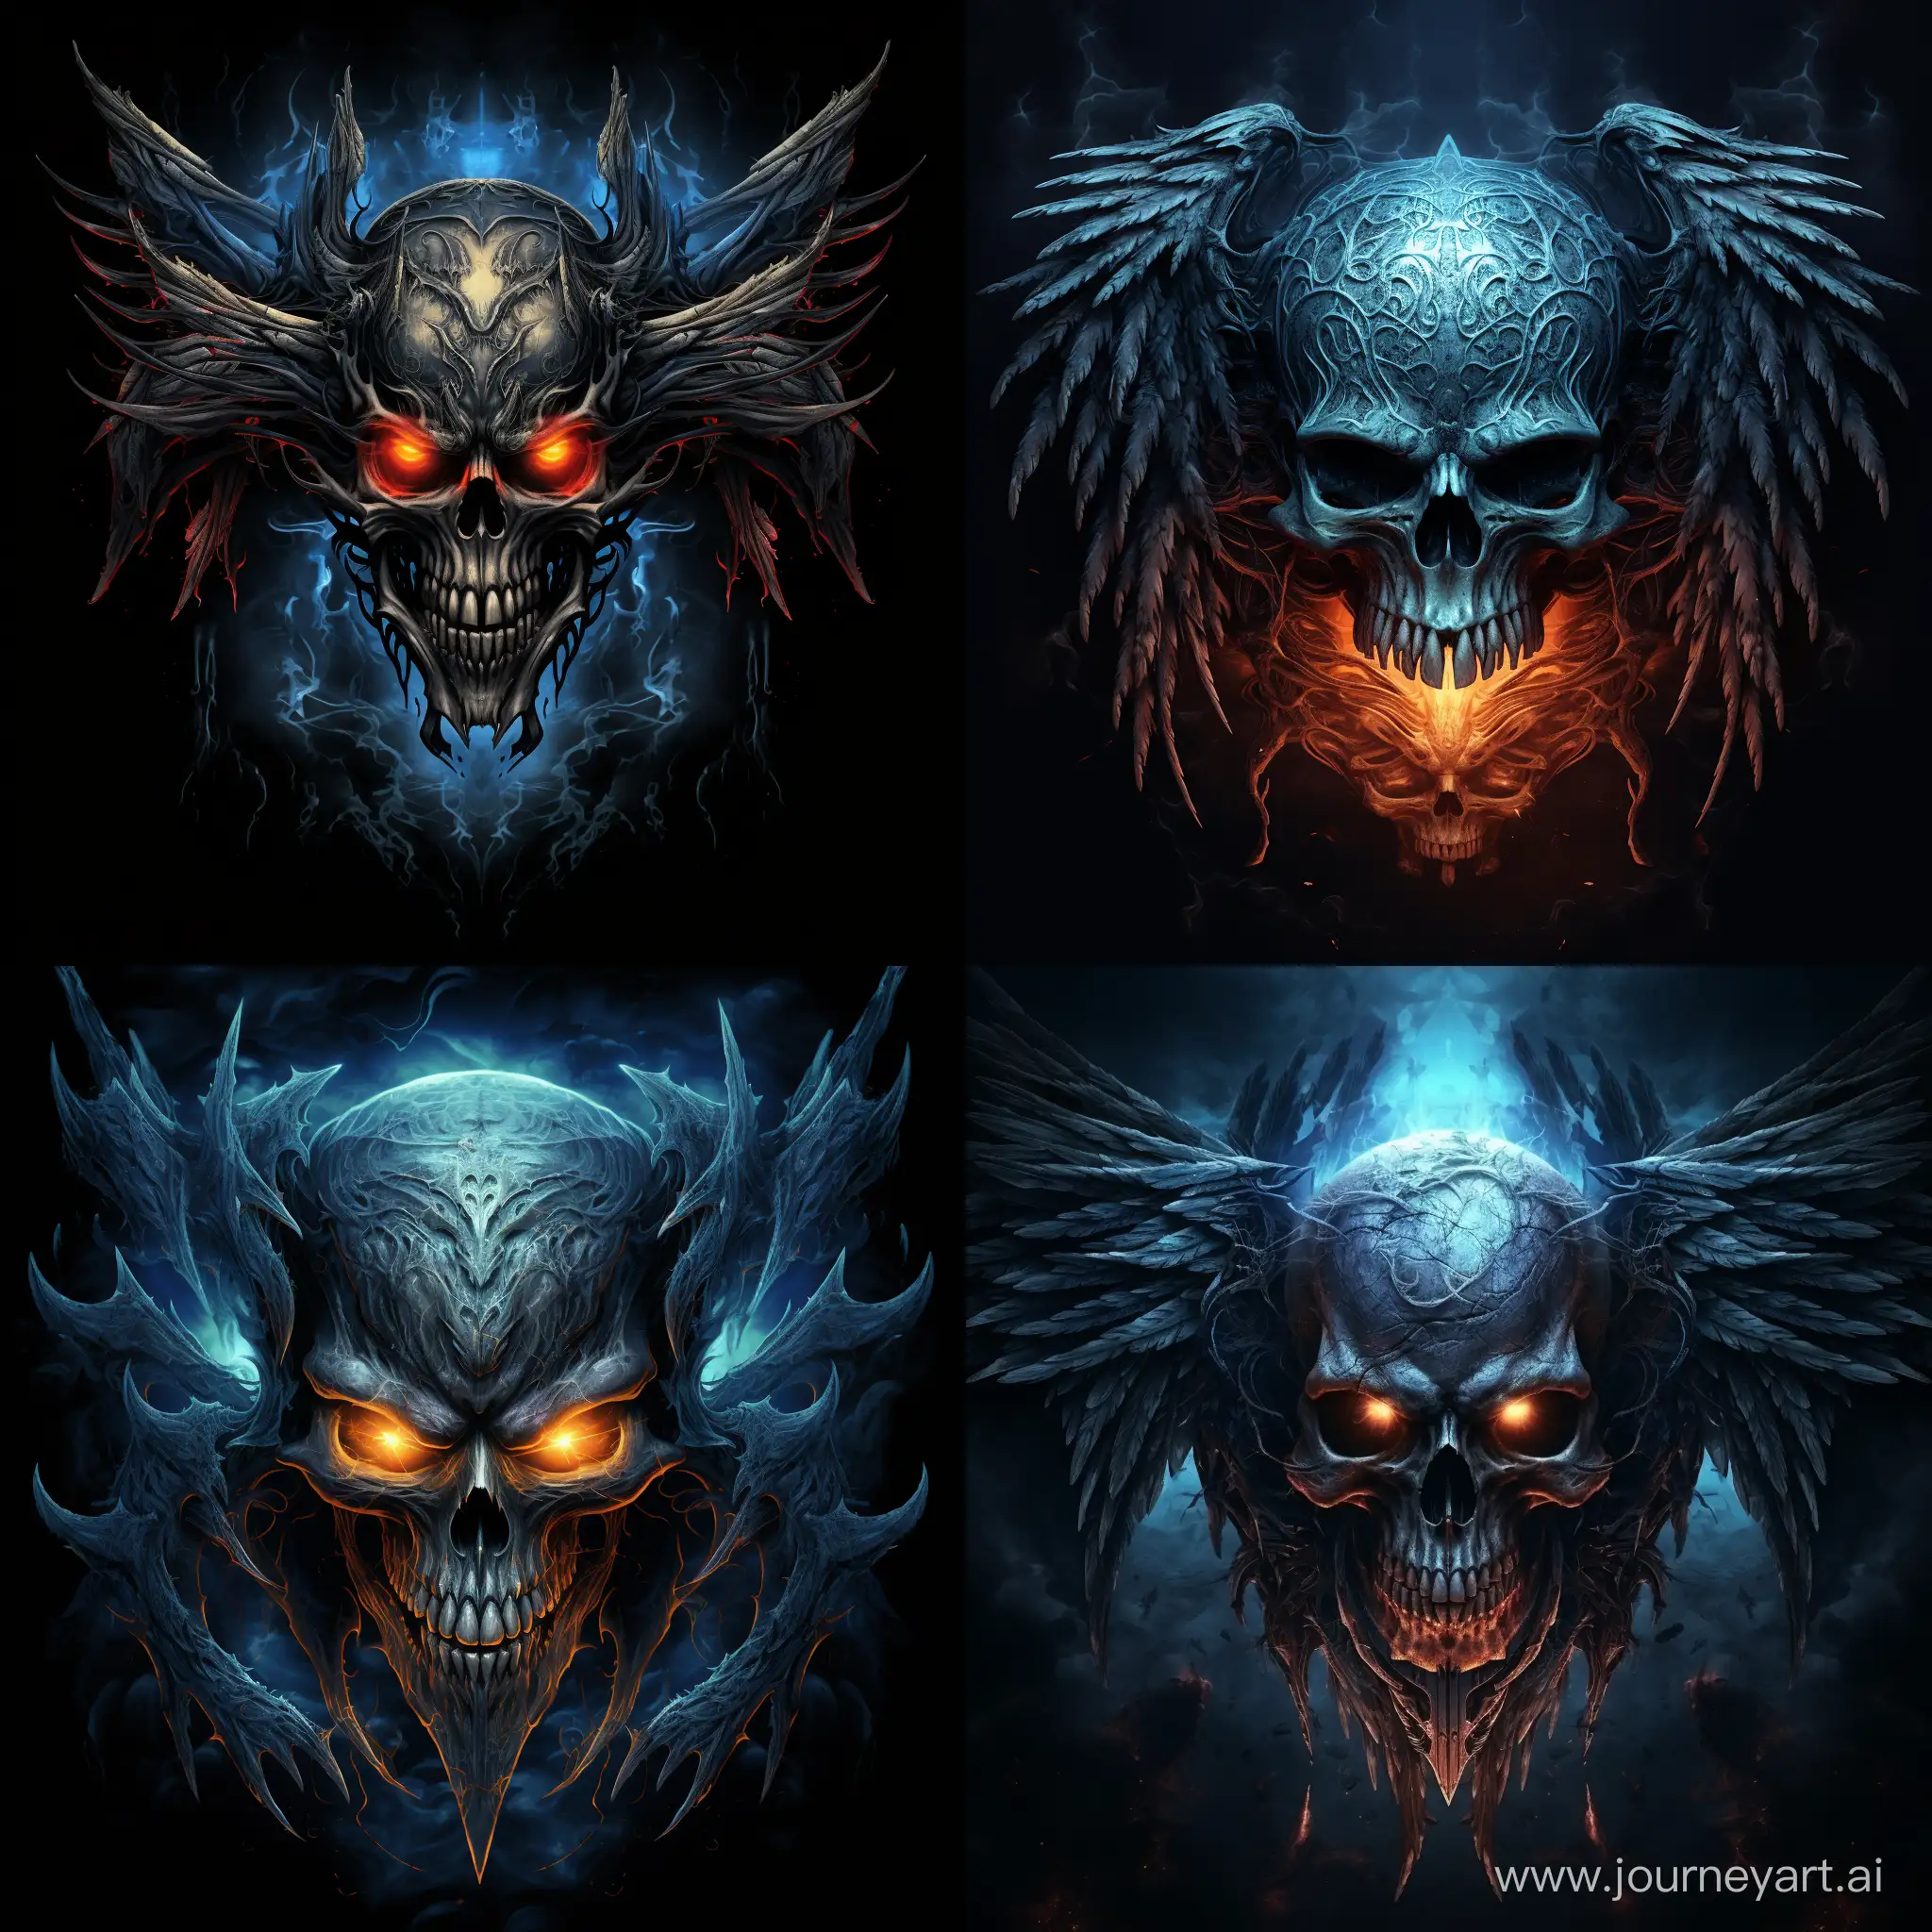 Mystical-Flying-Skull-with-Eerie-Blue-Flames